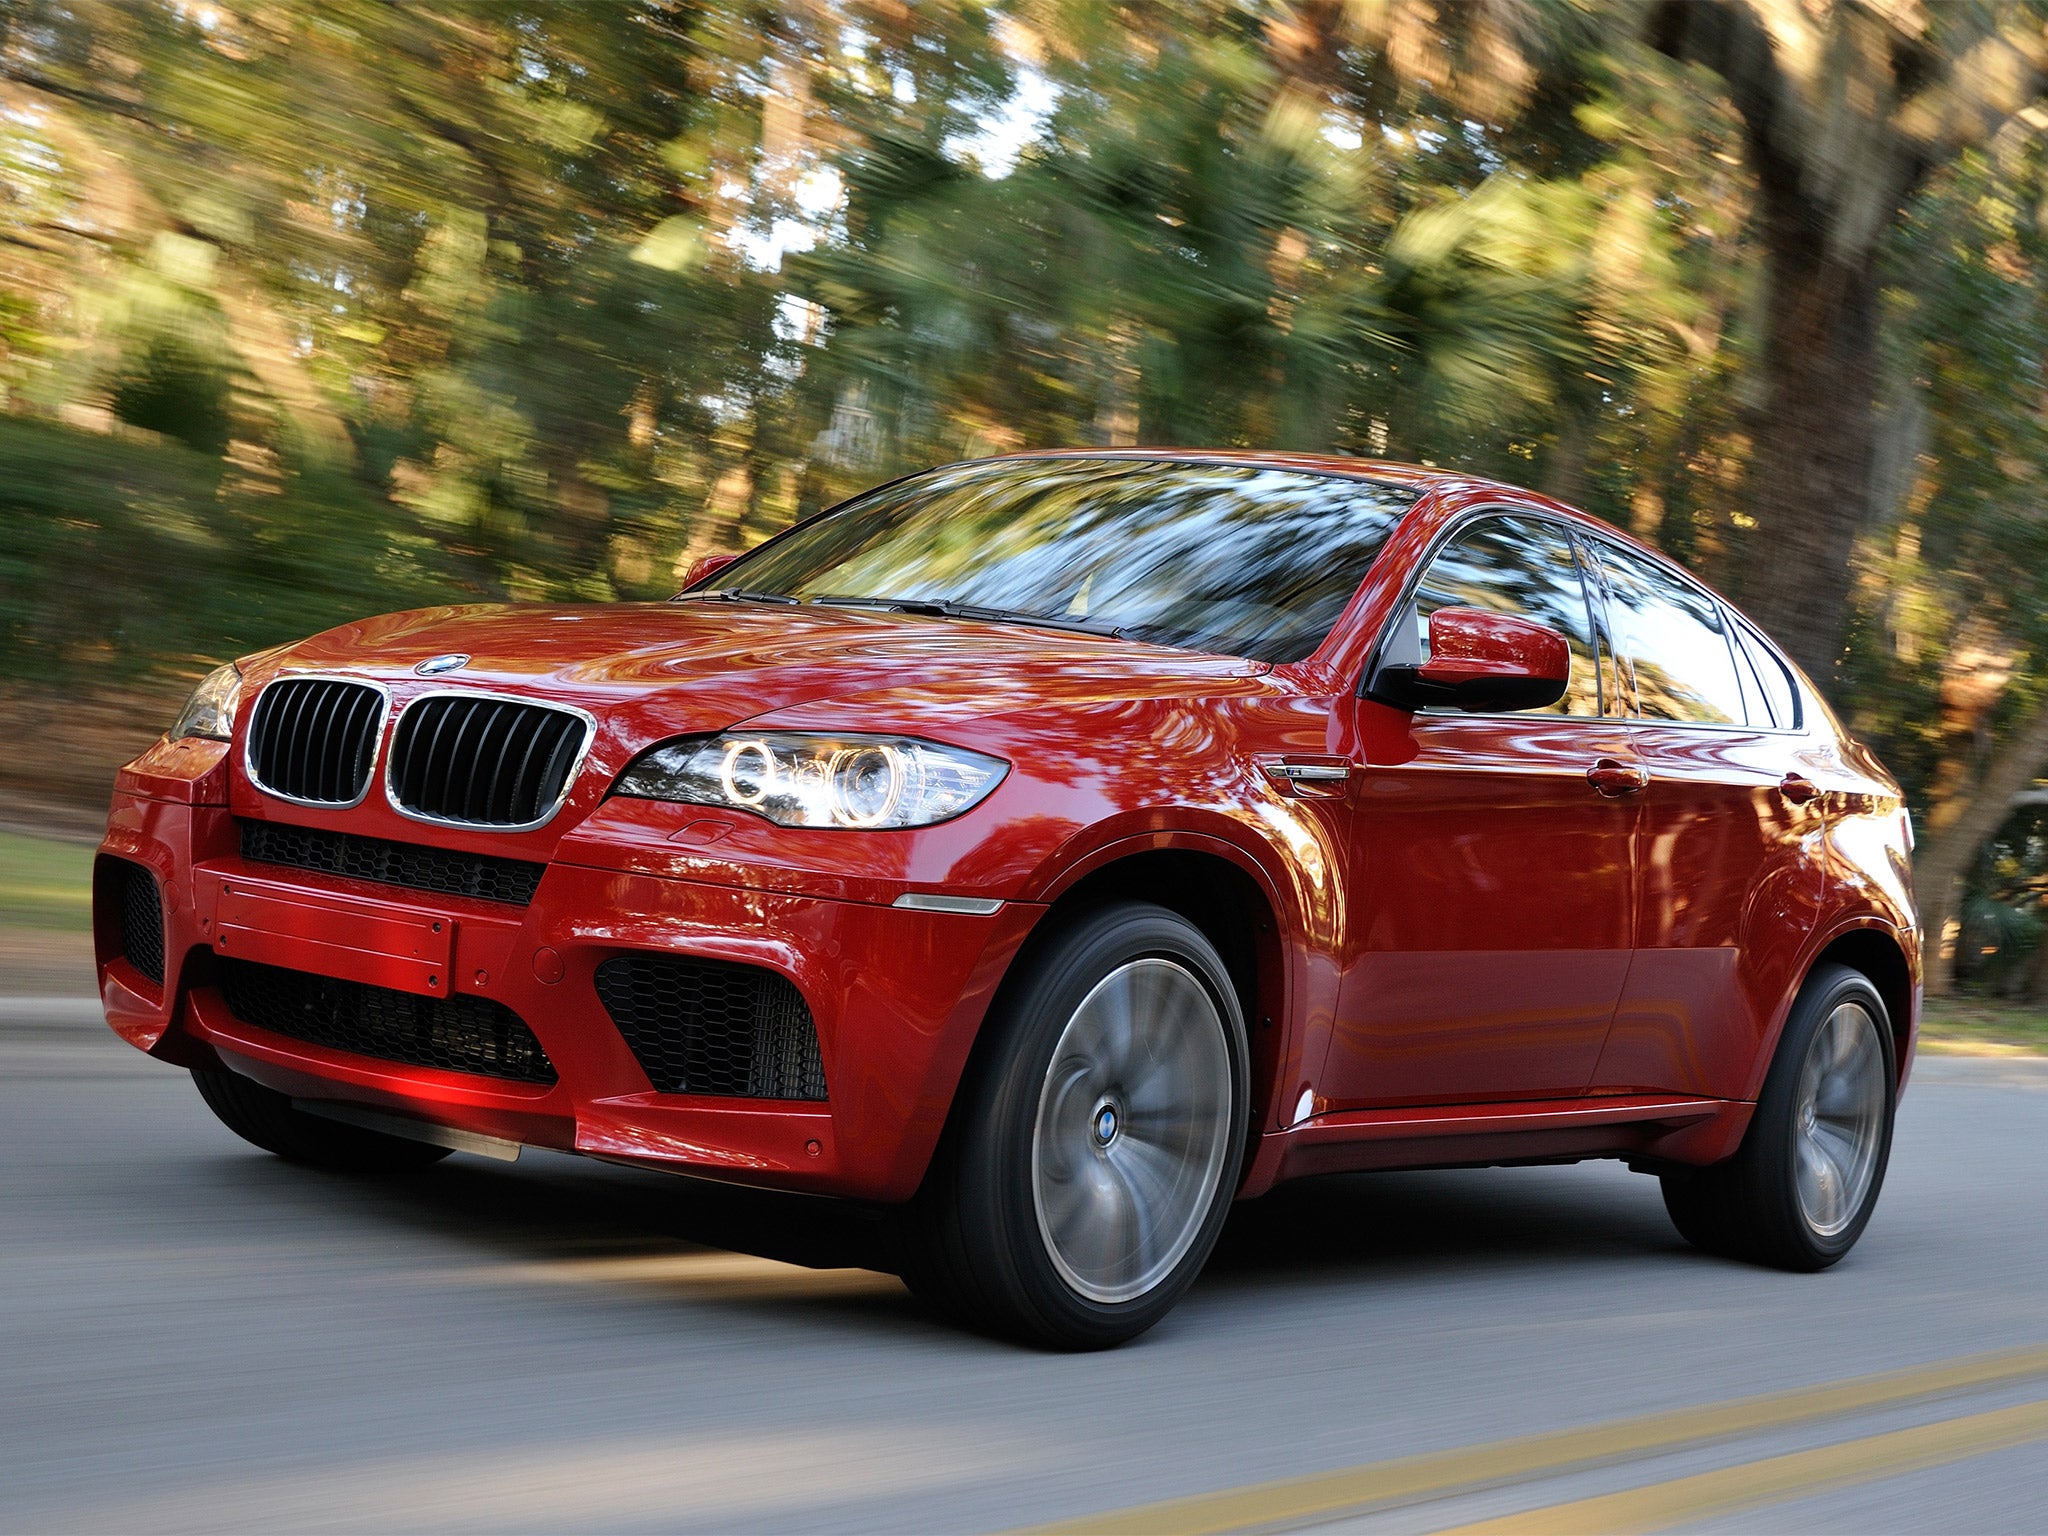 Sinful style: the new BMW X6M